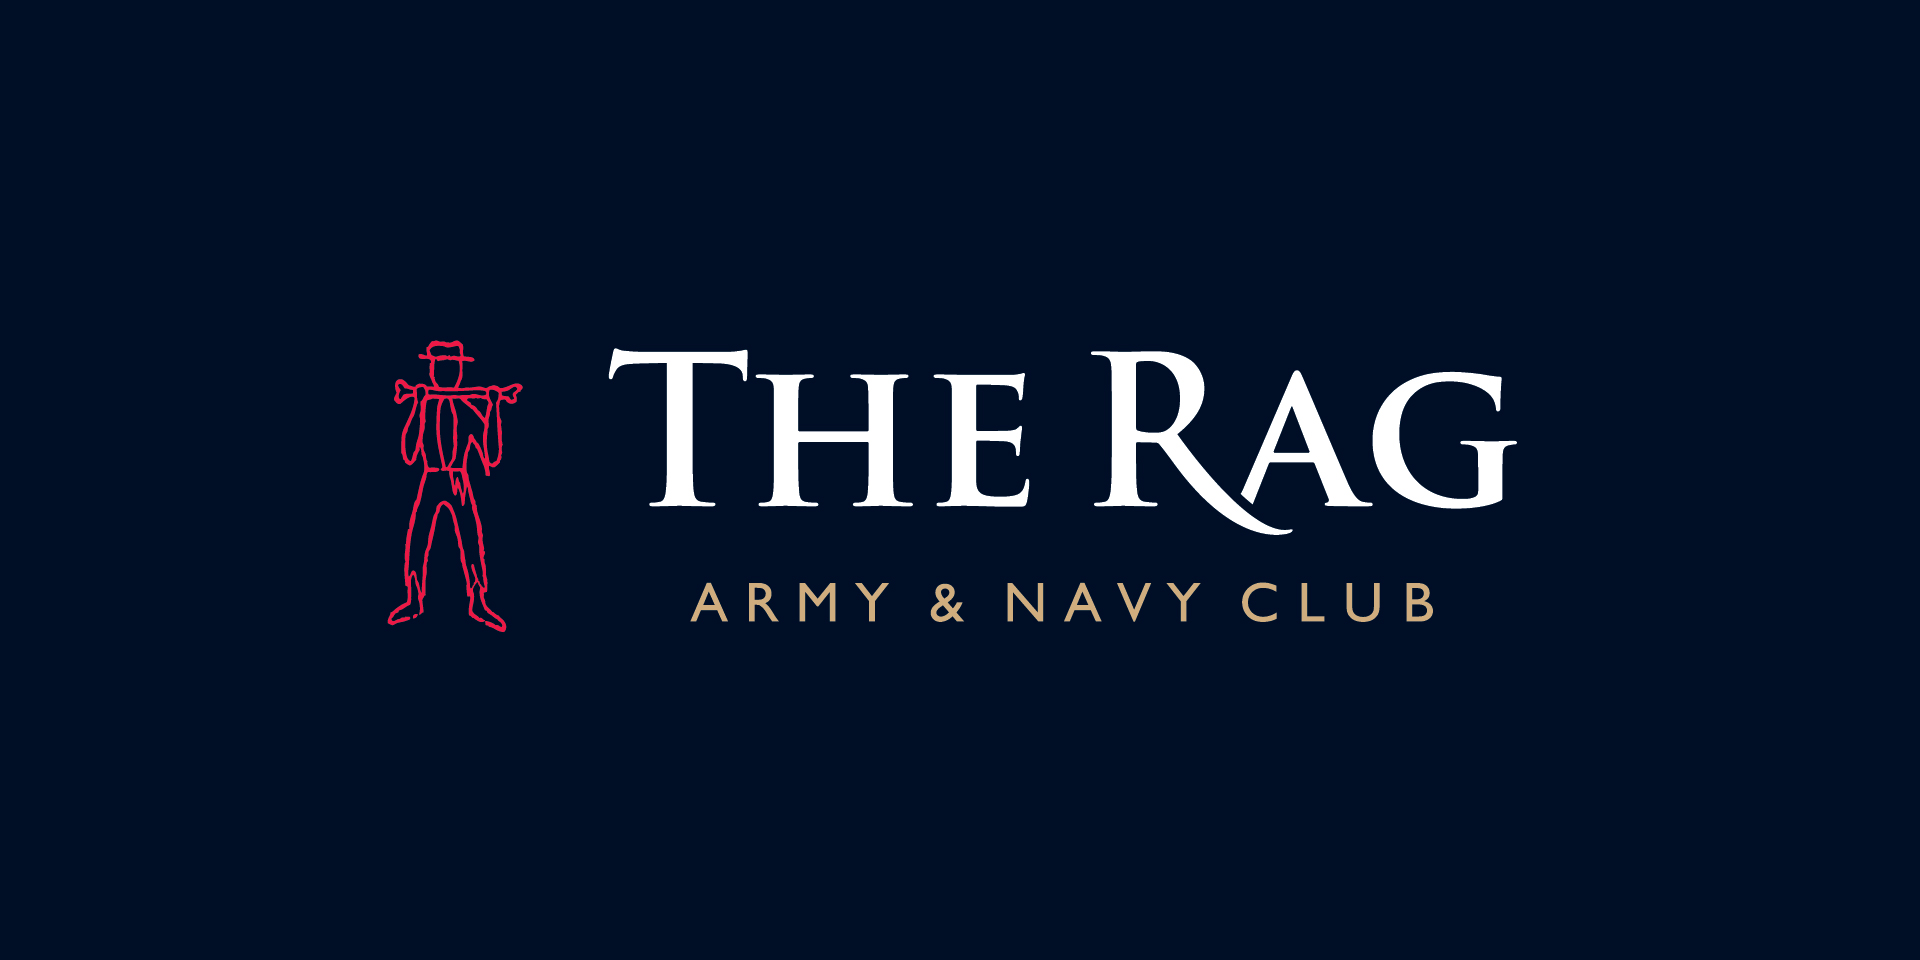 The Army and Navy Club brand identity THE RAG